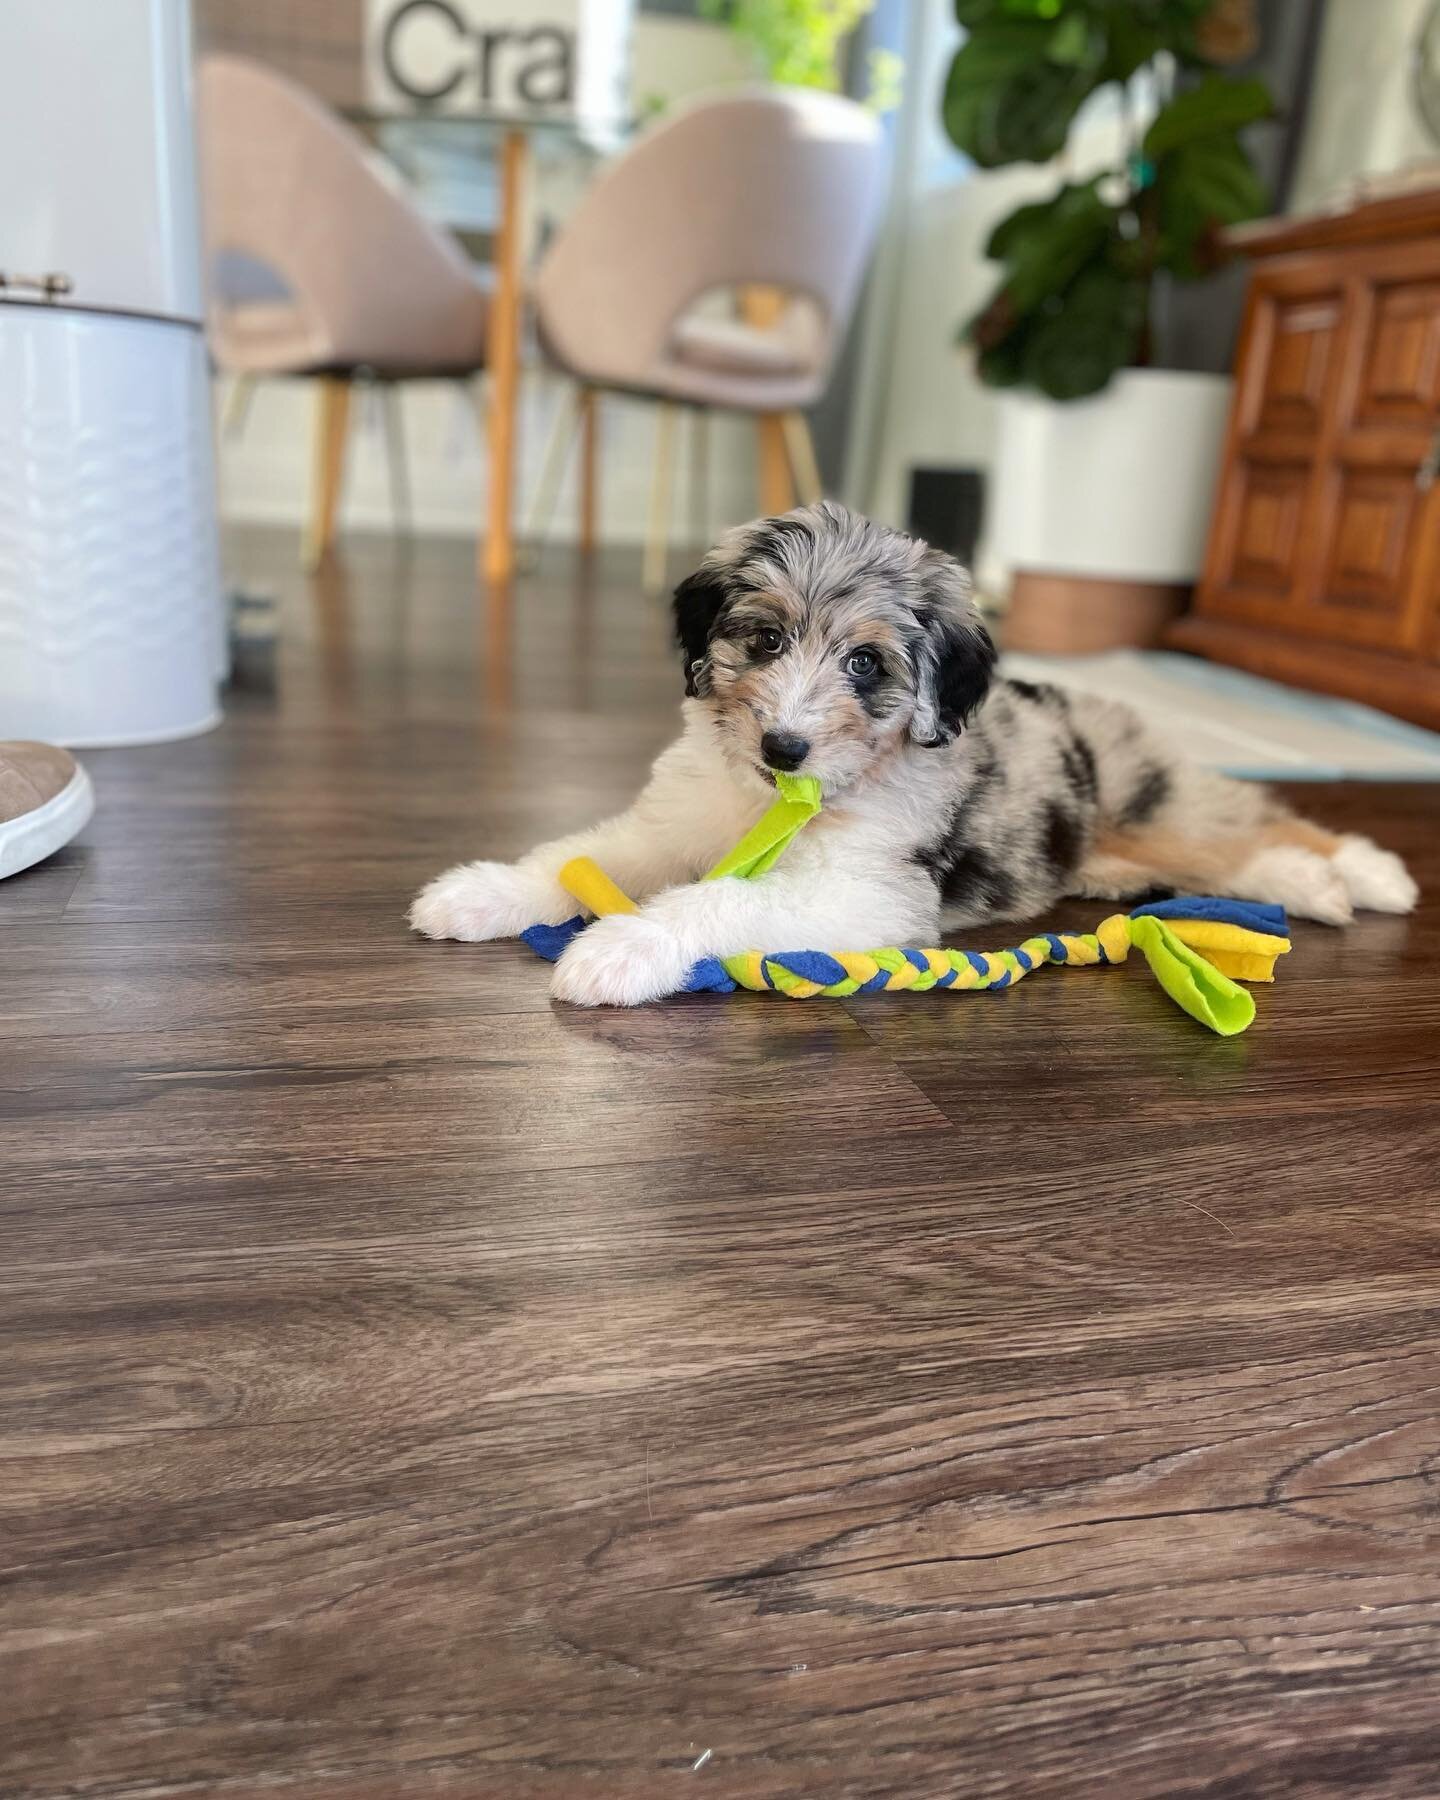 Everyone, meet Josie! A beautiful baby girl, entering our home at a whopping 8lbs 2oz. 🐶

Mommy and Daddy are doing great and feeling so grateful for our growing family&hellip;👨&zwj;👩&zwj;👧 

#birthstory #justkidding #puppy #aussiedoodle